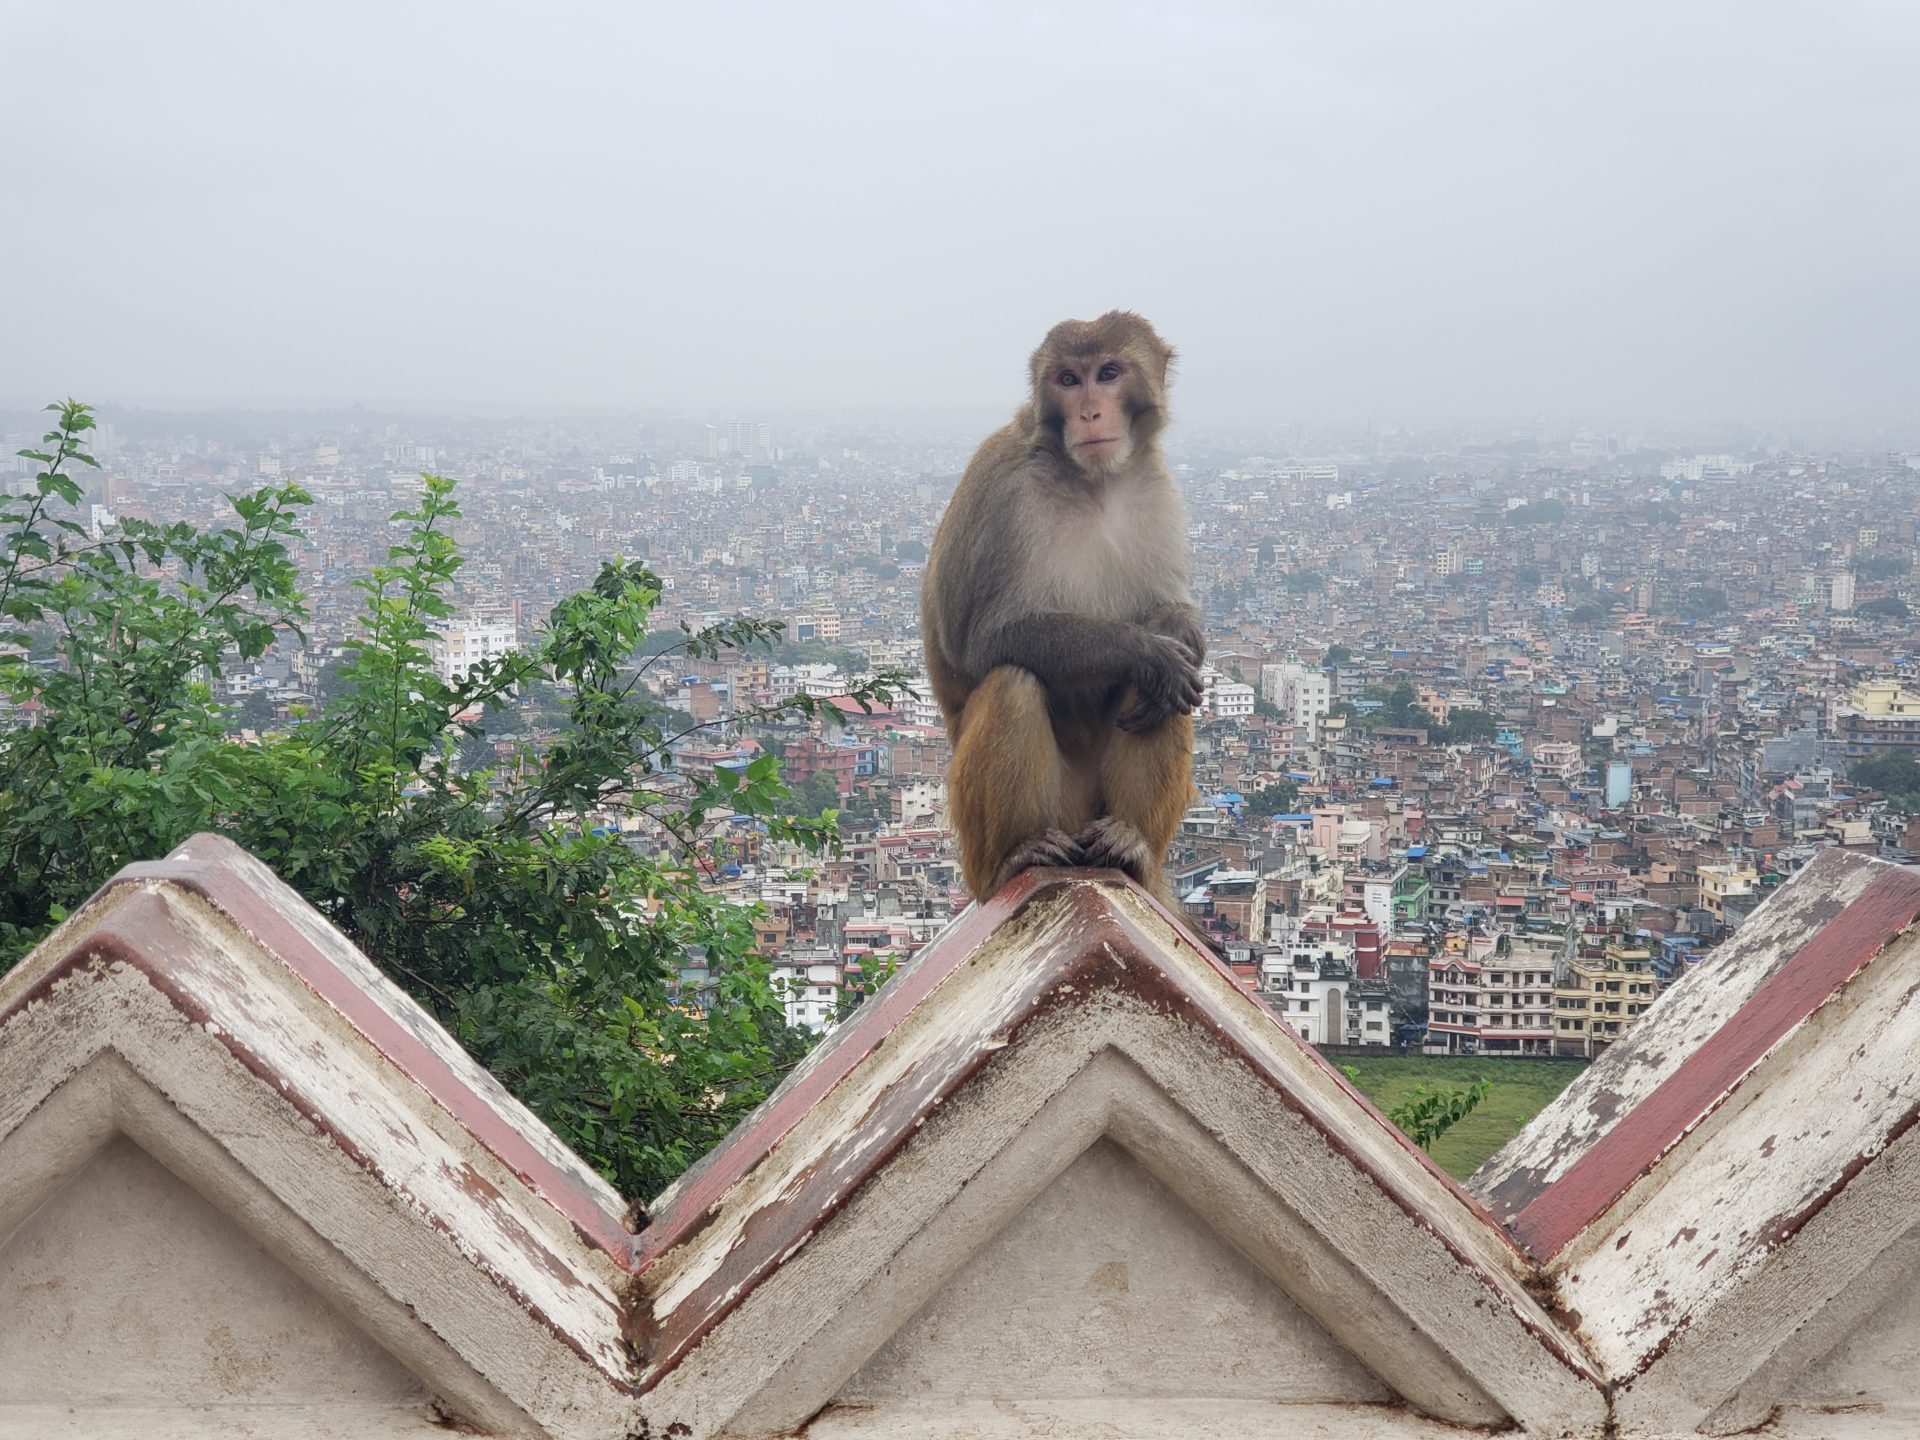 a monkey sitting on a ledge with a city in the background